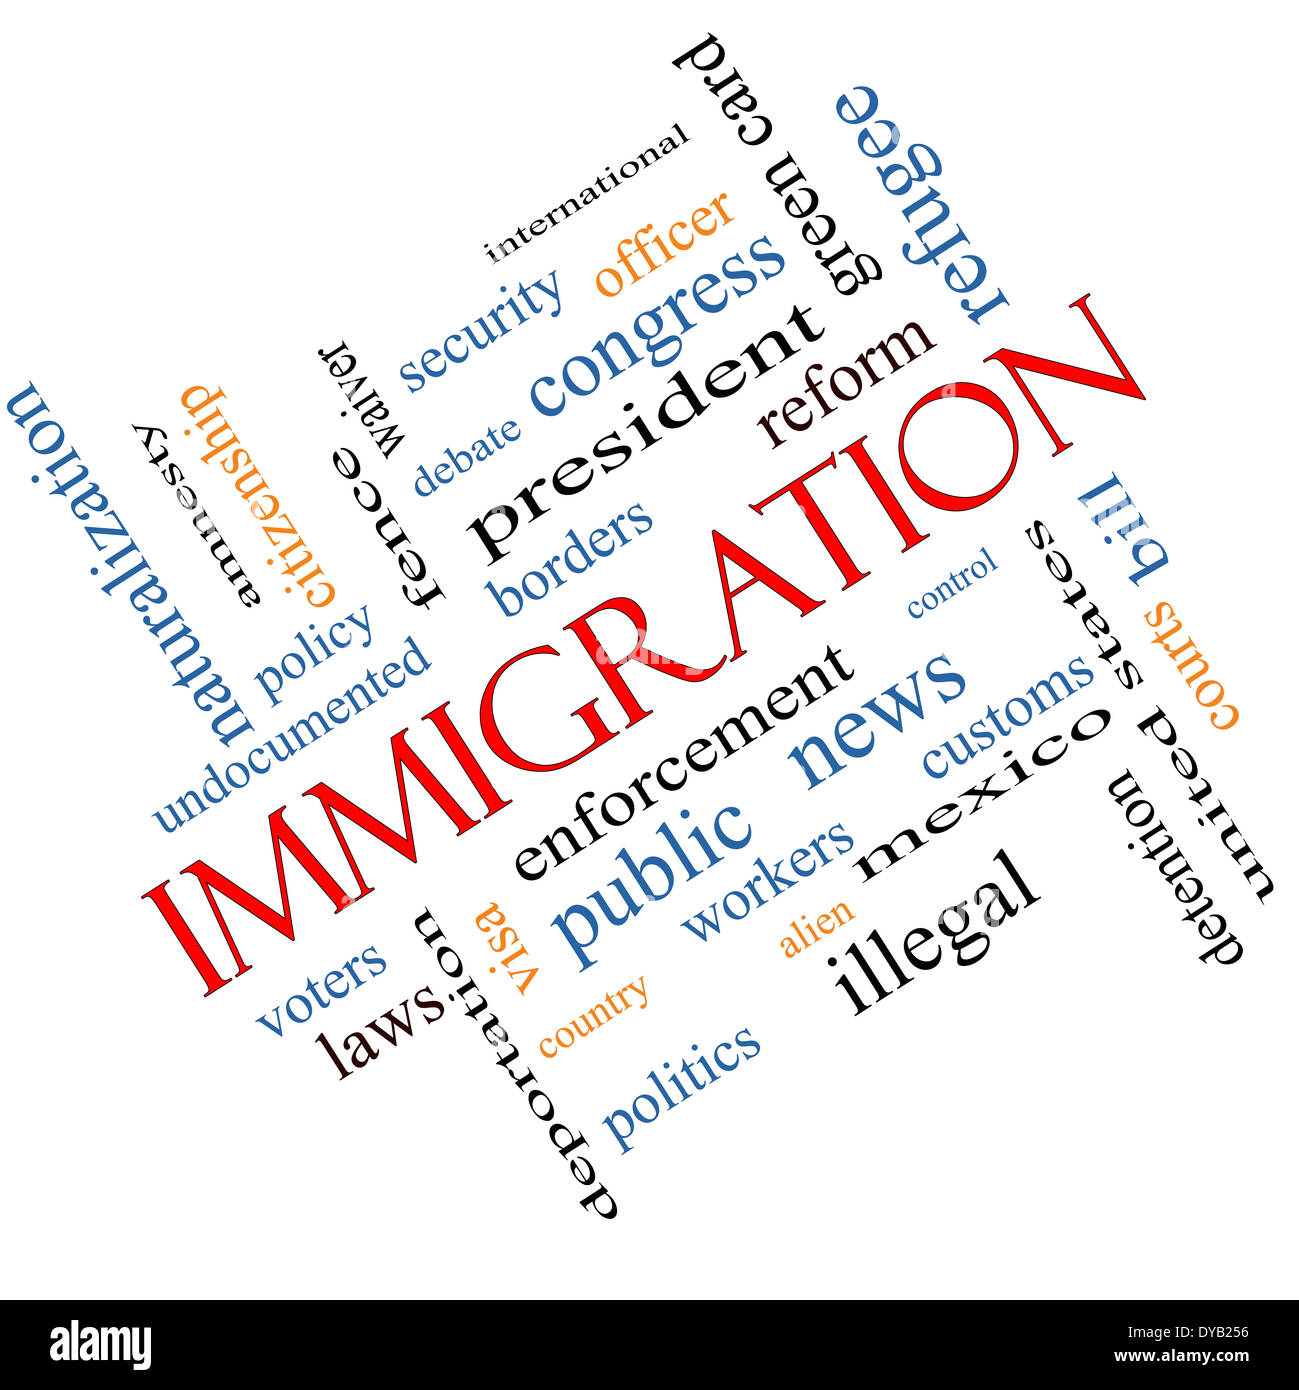 Immigration Word Cloud Concept Angled with great terms such as reform, borders, alien and more. Stock Photo